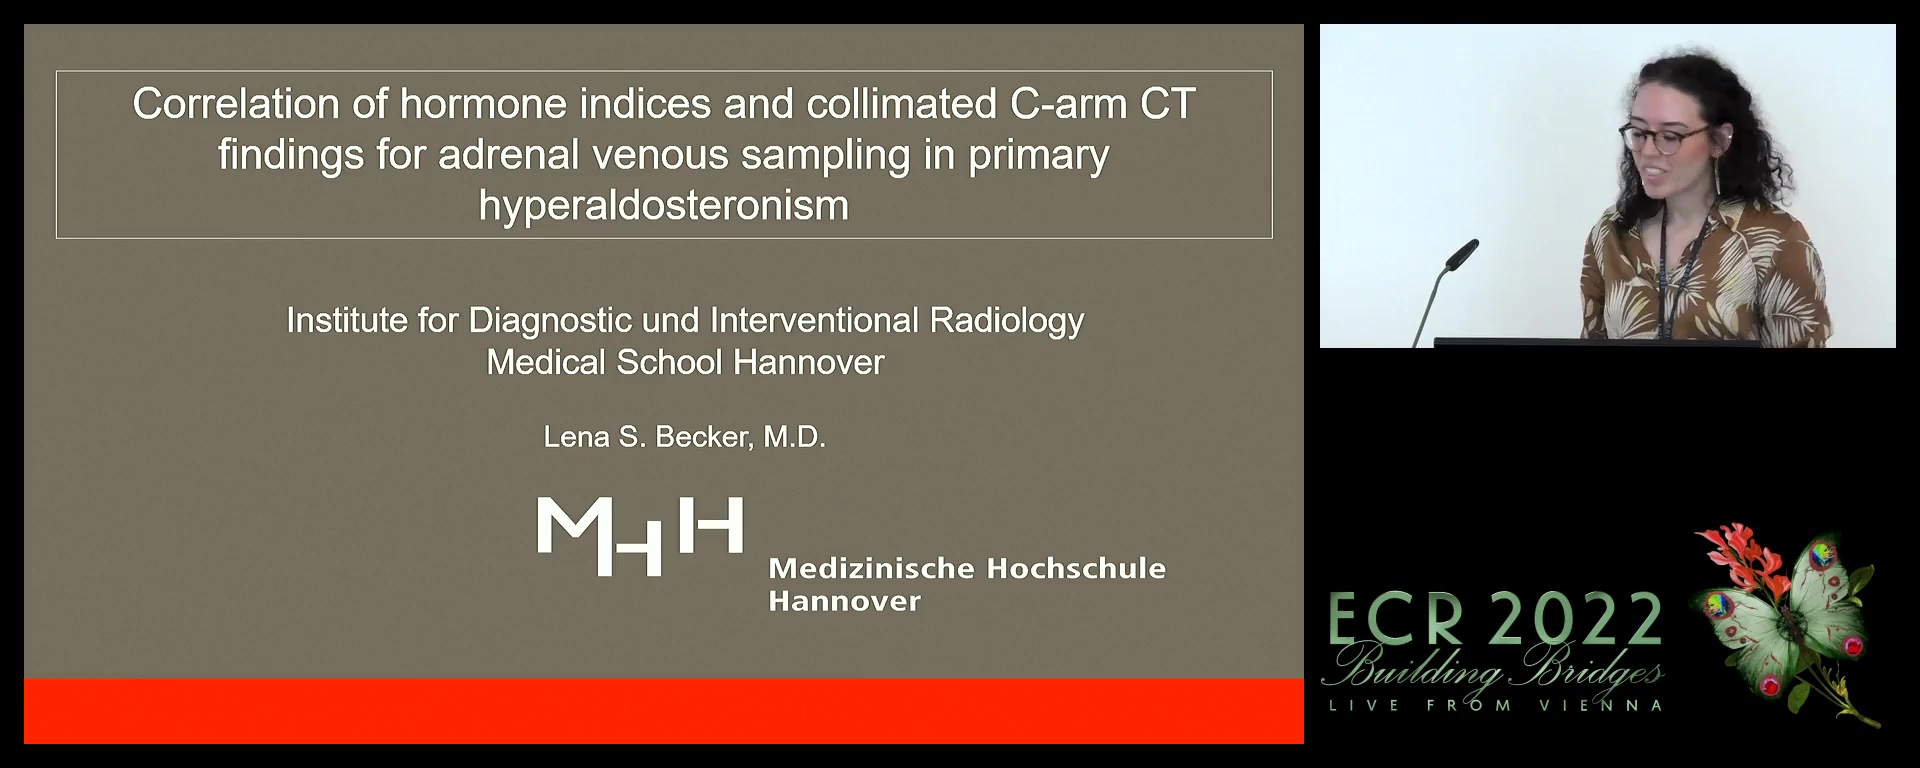 Correlation of hormone indices and collimated C-arm CT findings for adrenal venous sampling in primary hyperaldosteronism - Lena Becker, Hannover / DE